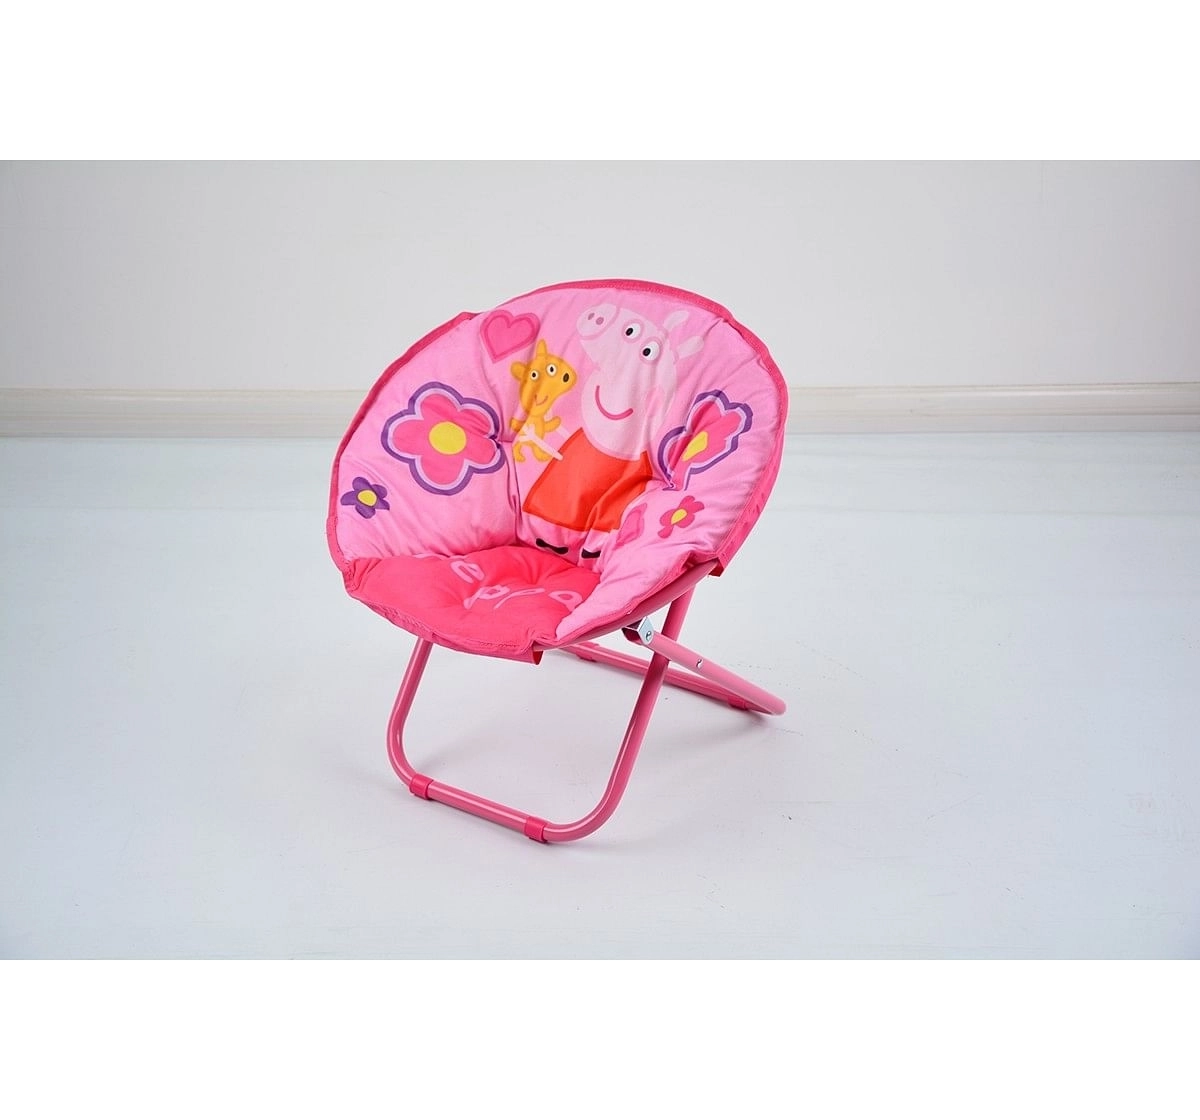 Flourish  Peppa Pig Moon Chair Outdoor Leisure for Kids age 3Y+ 